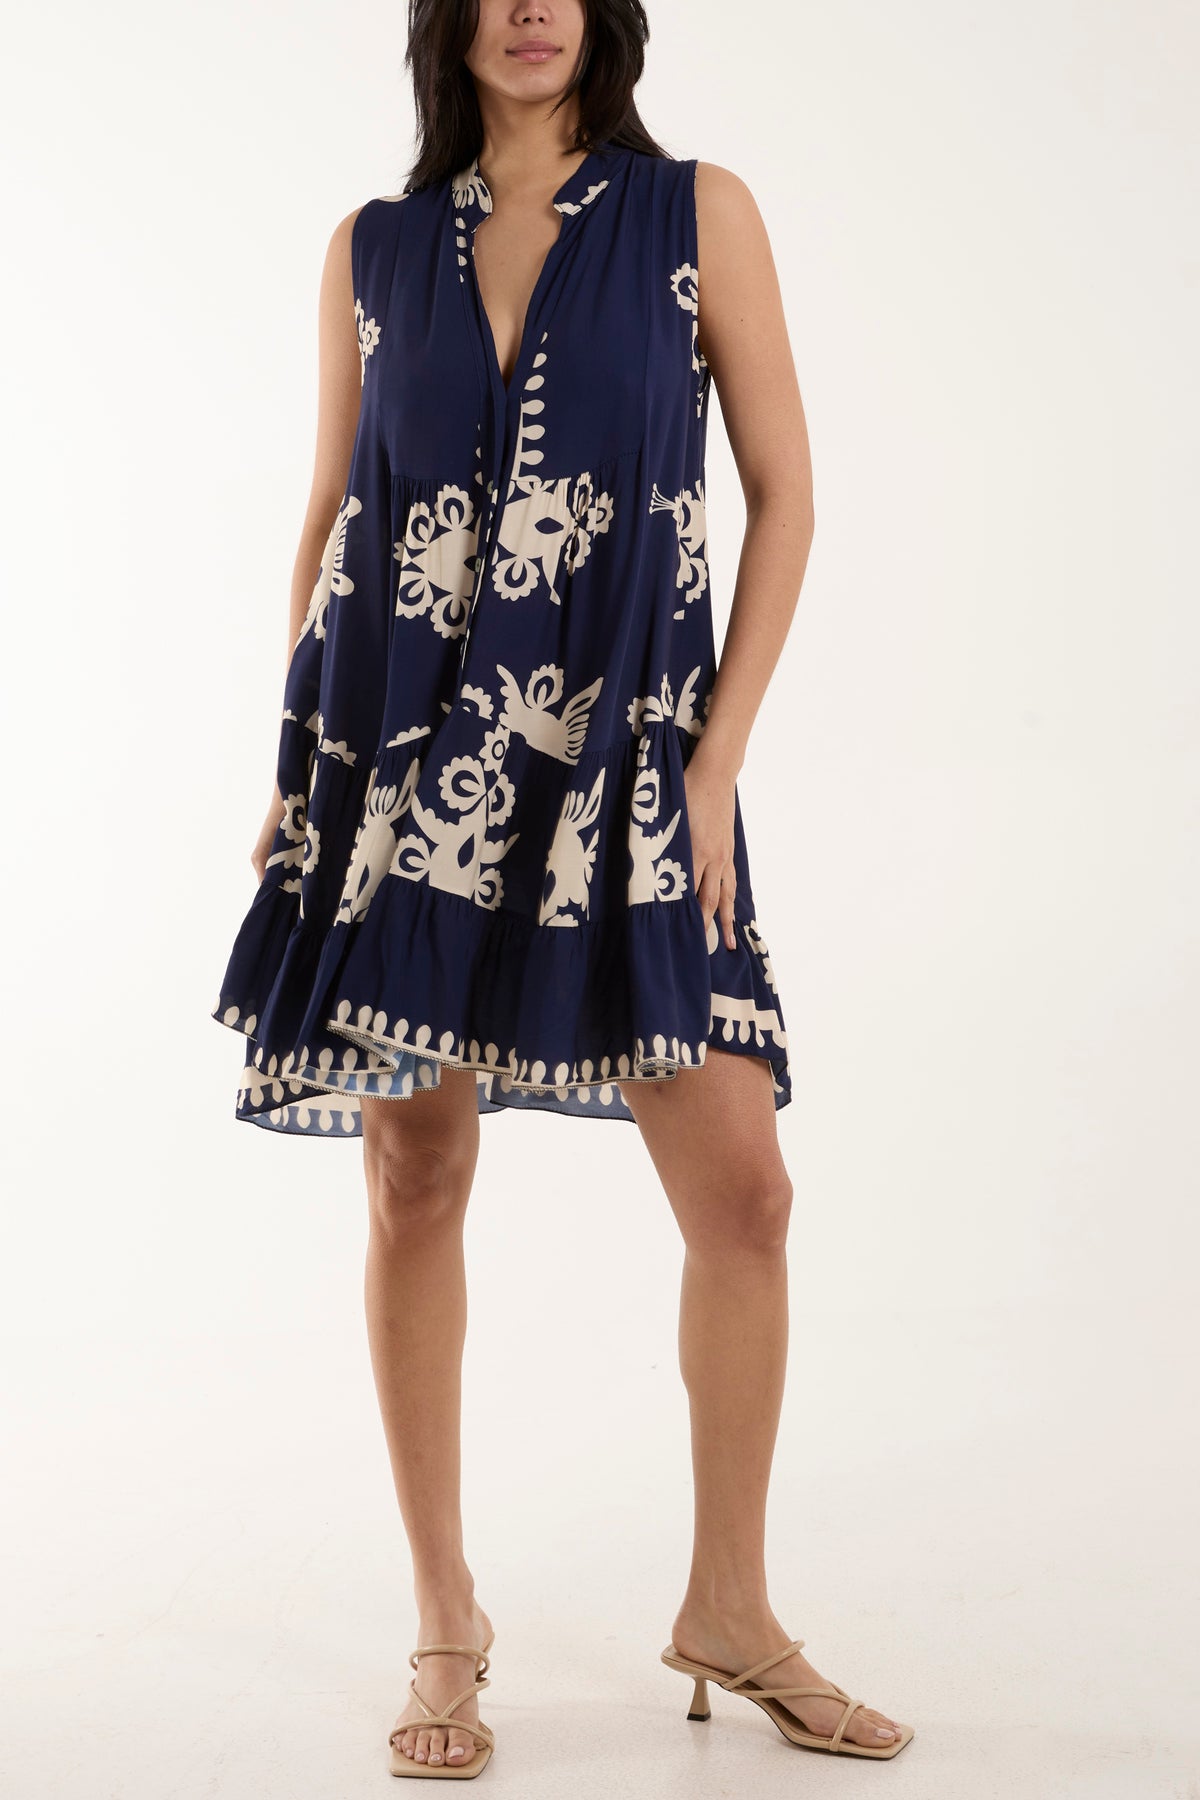 Sleeveless Tiered Placement Print Dress